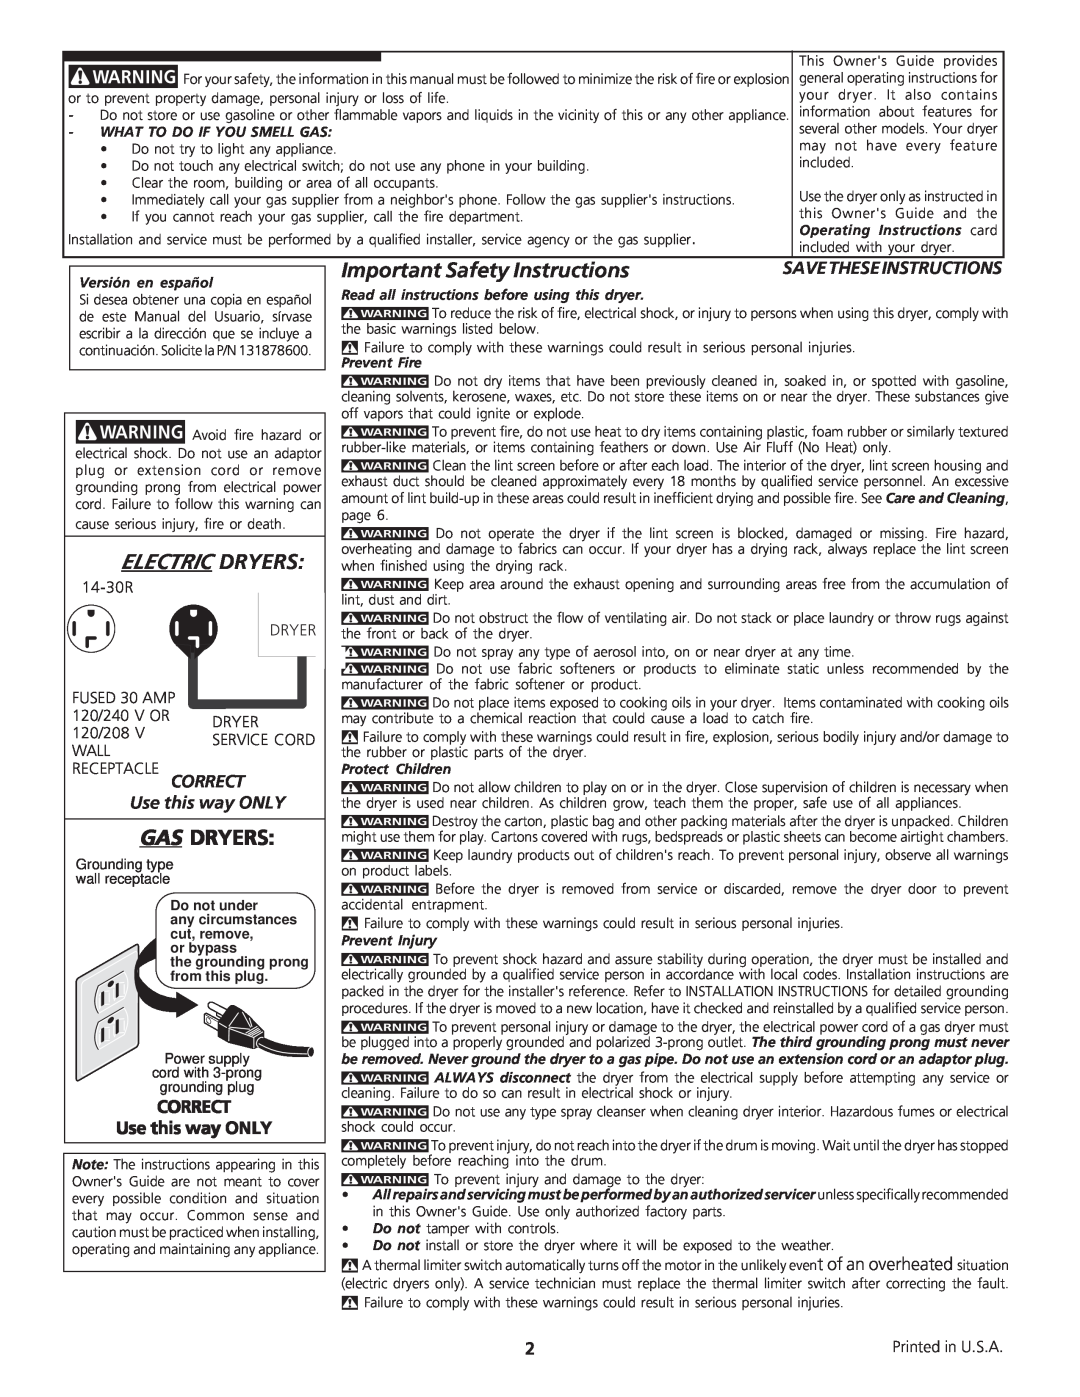 Airlux Group 13467-1200 (0512) Important Safety Instructions, Correct, Use this way ONLY, Electricdryers, Gasdryers 